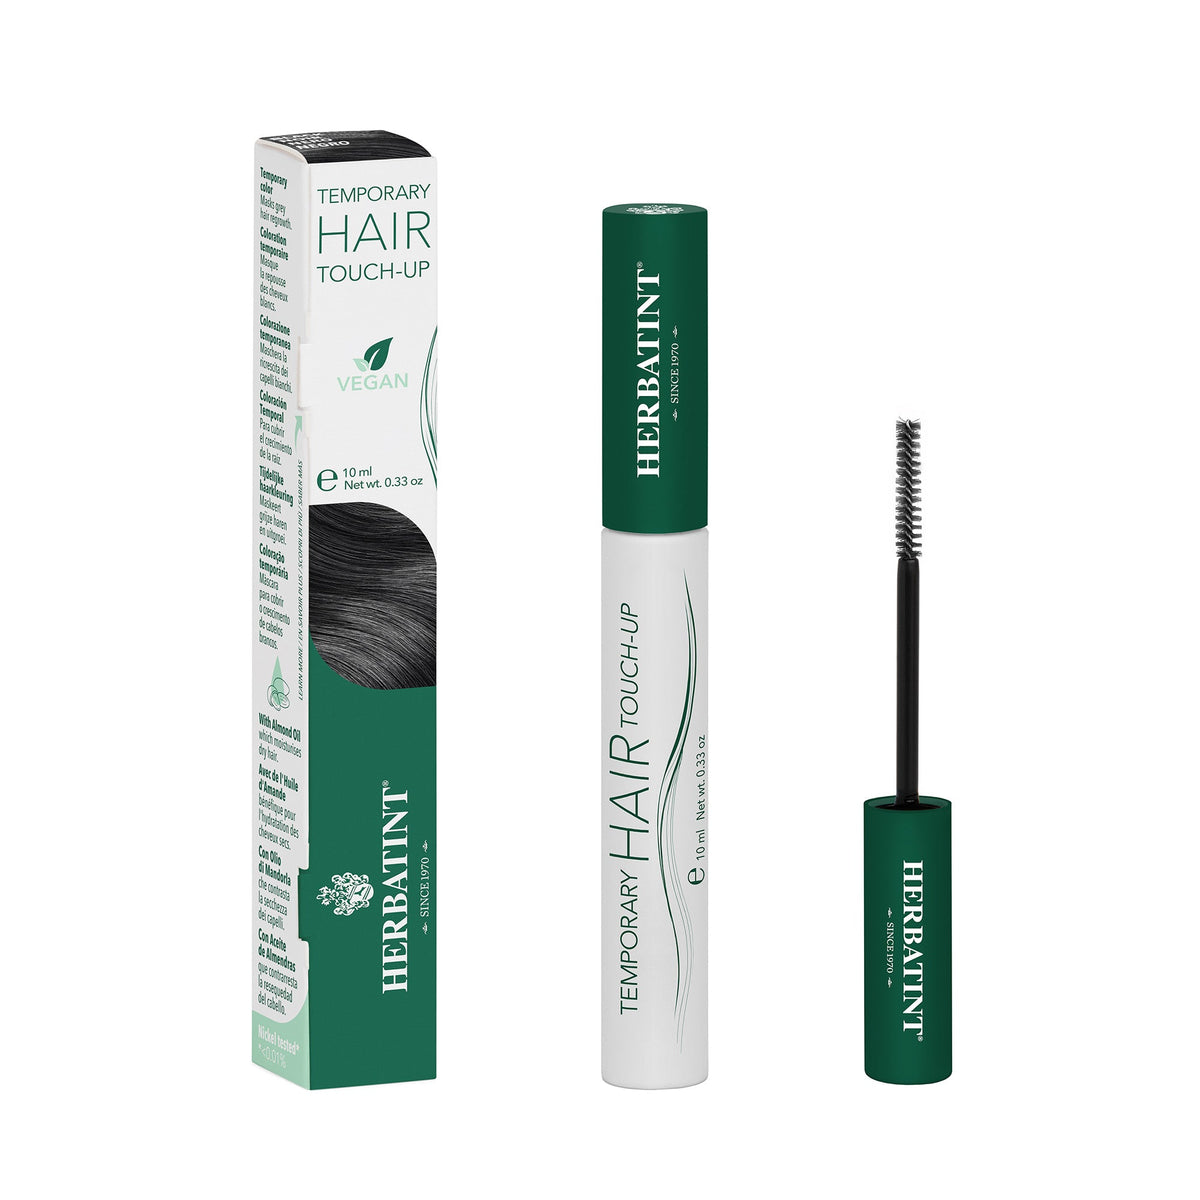 Herbatint Temporary Hair Touch-up Black 60 mL - A.Vogel Canada